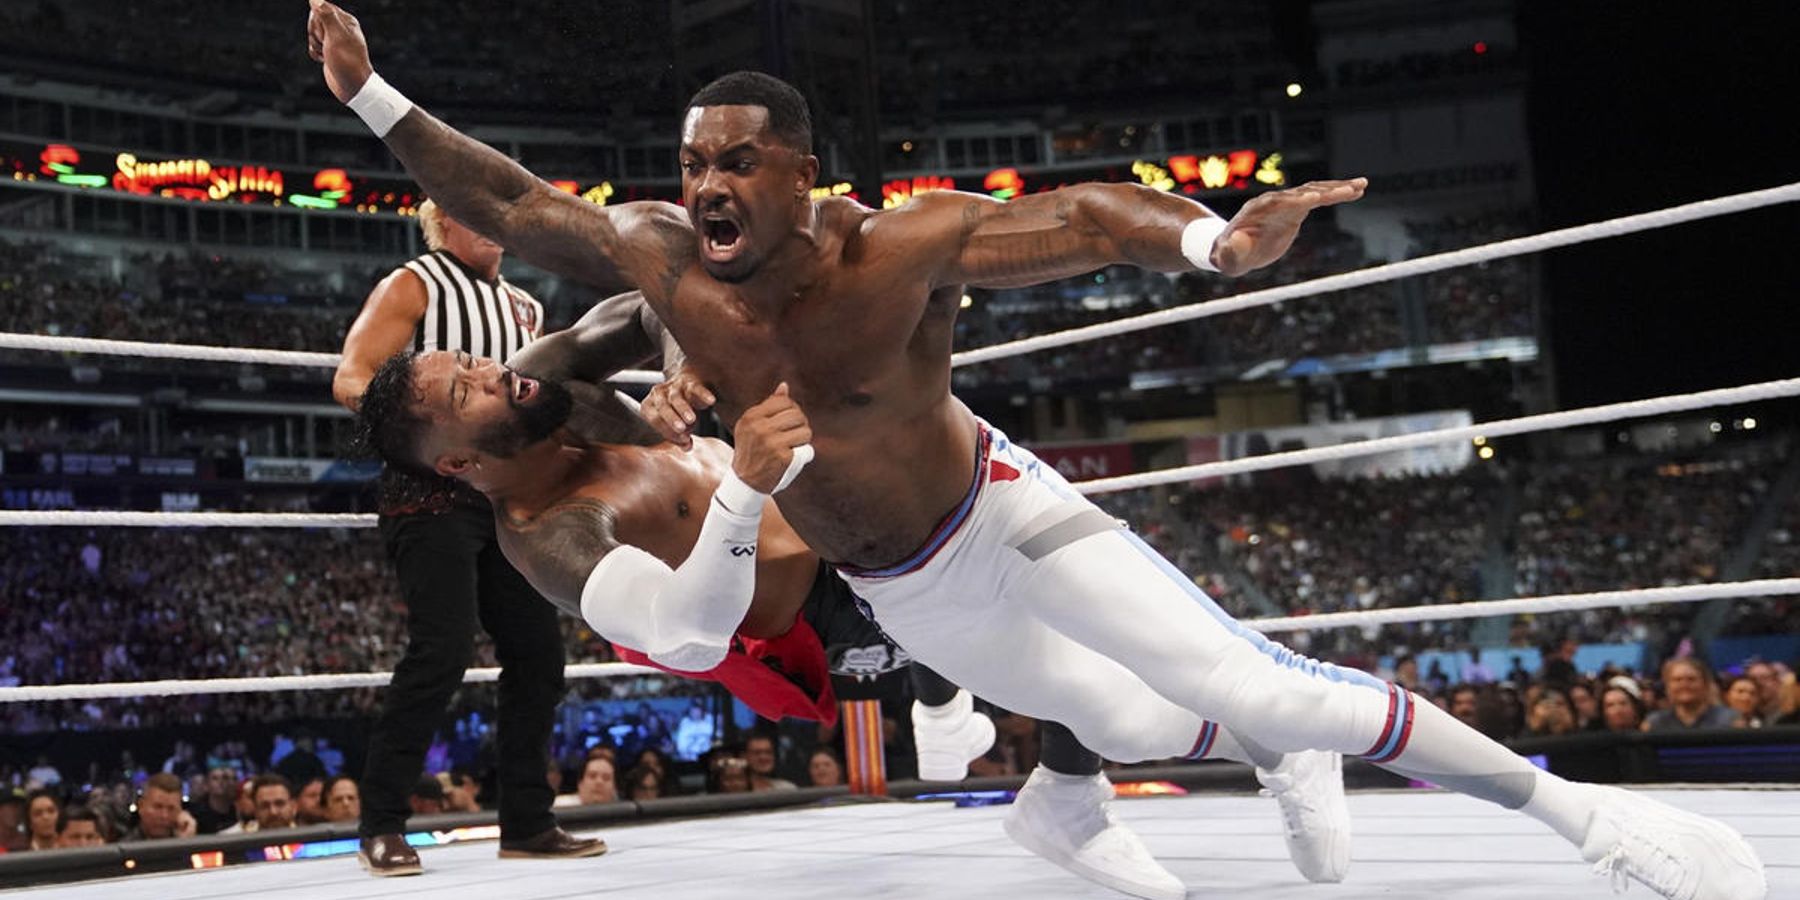 Montez Ford delivers a monster clothesline during a match against The Usos at WWE SummerSlam.